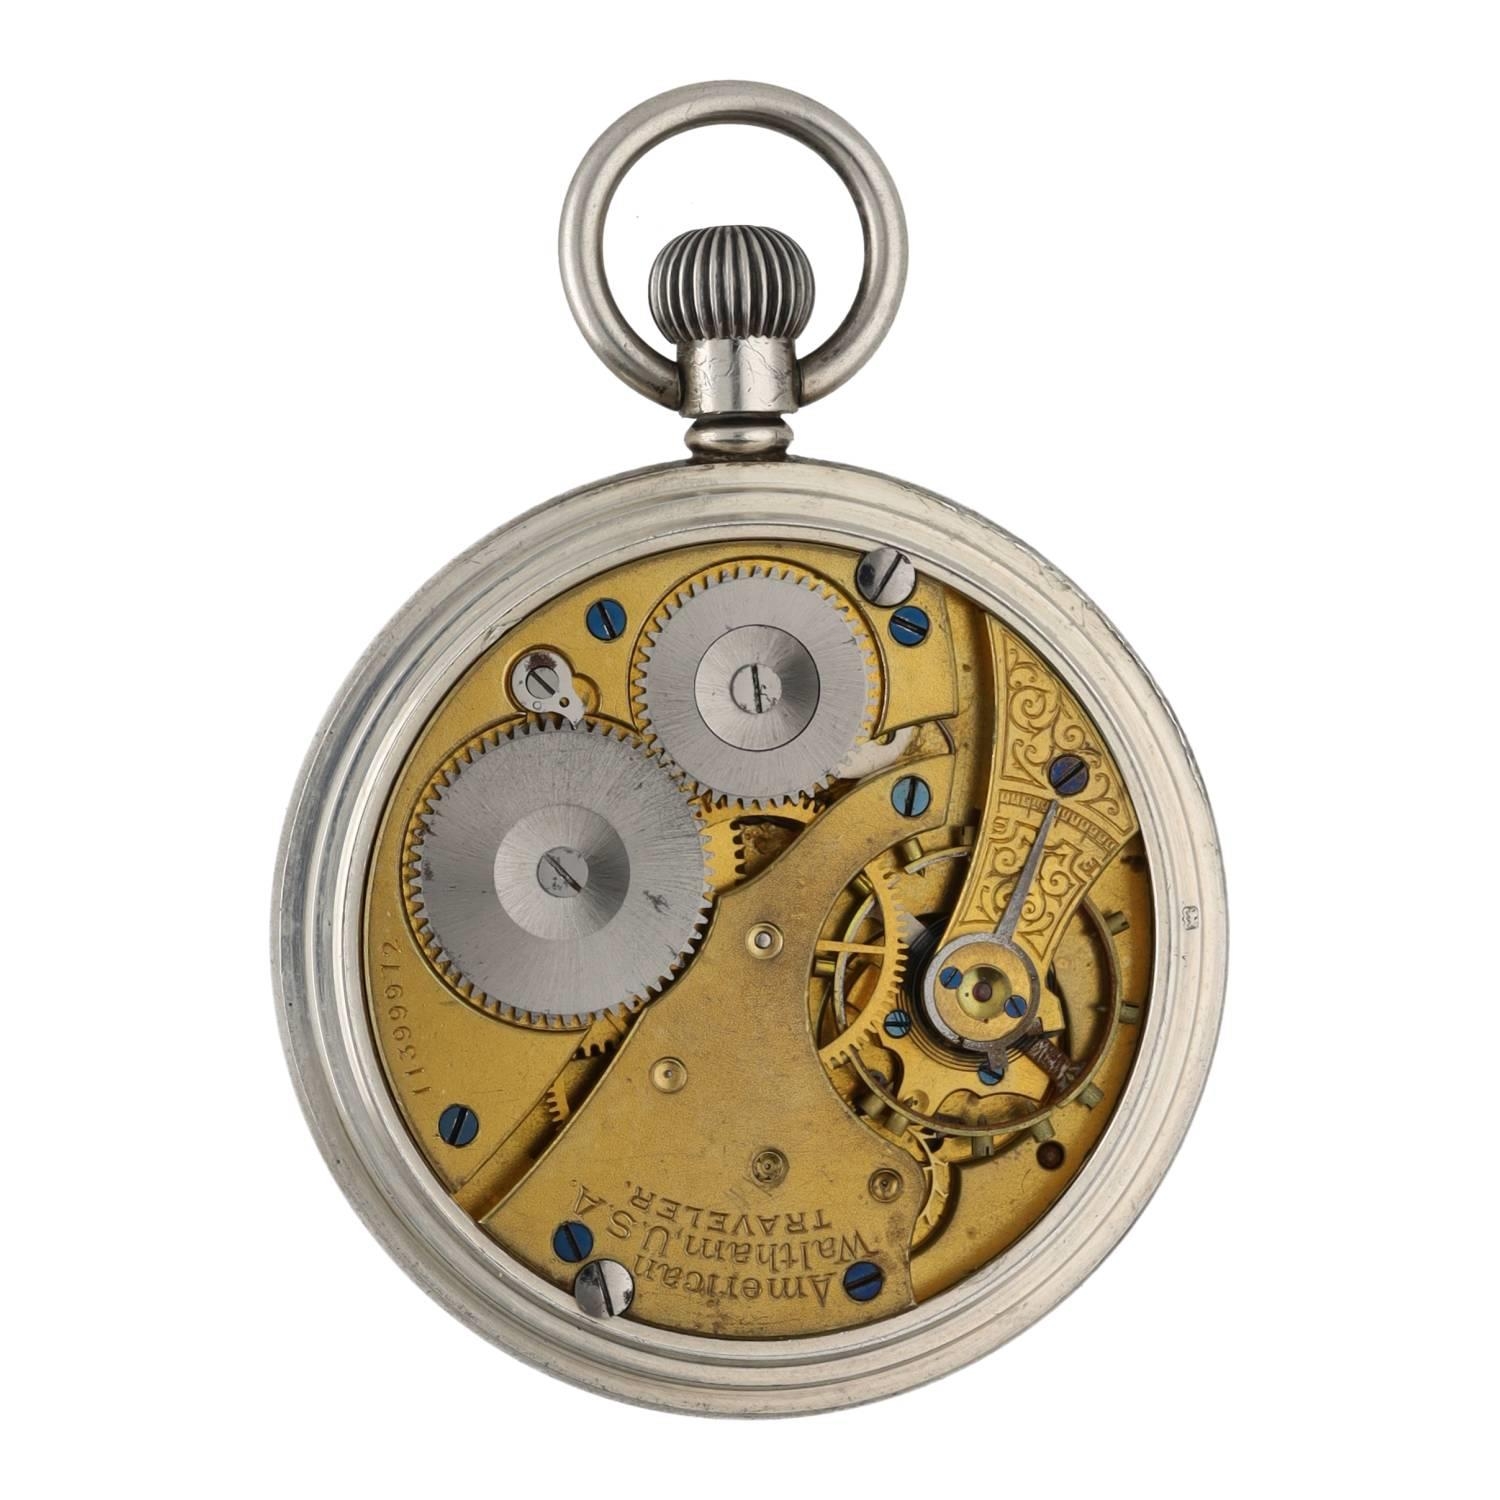 American Waltham 'Traveler' silver lever pocket watch, circa 1902, serial no. 11399972, signed - Image 2 of 3